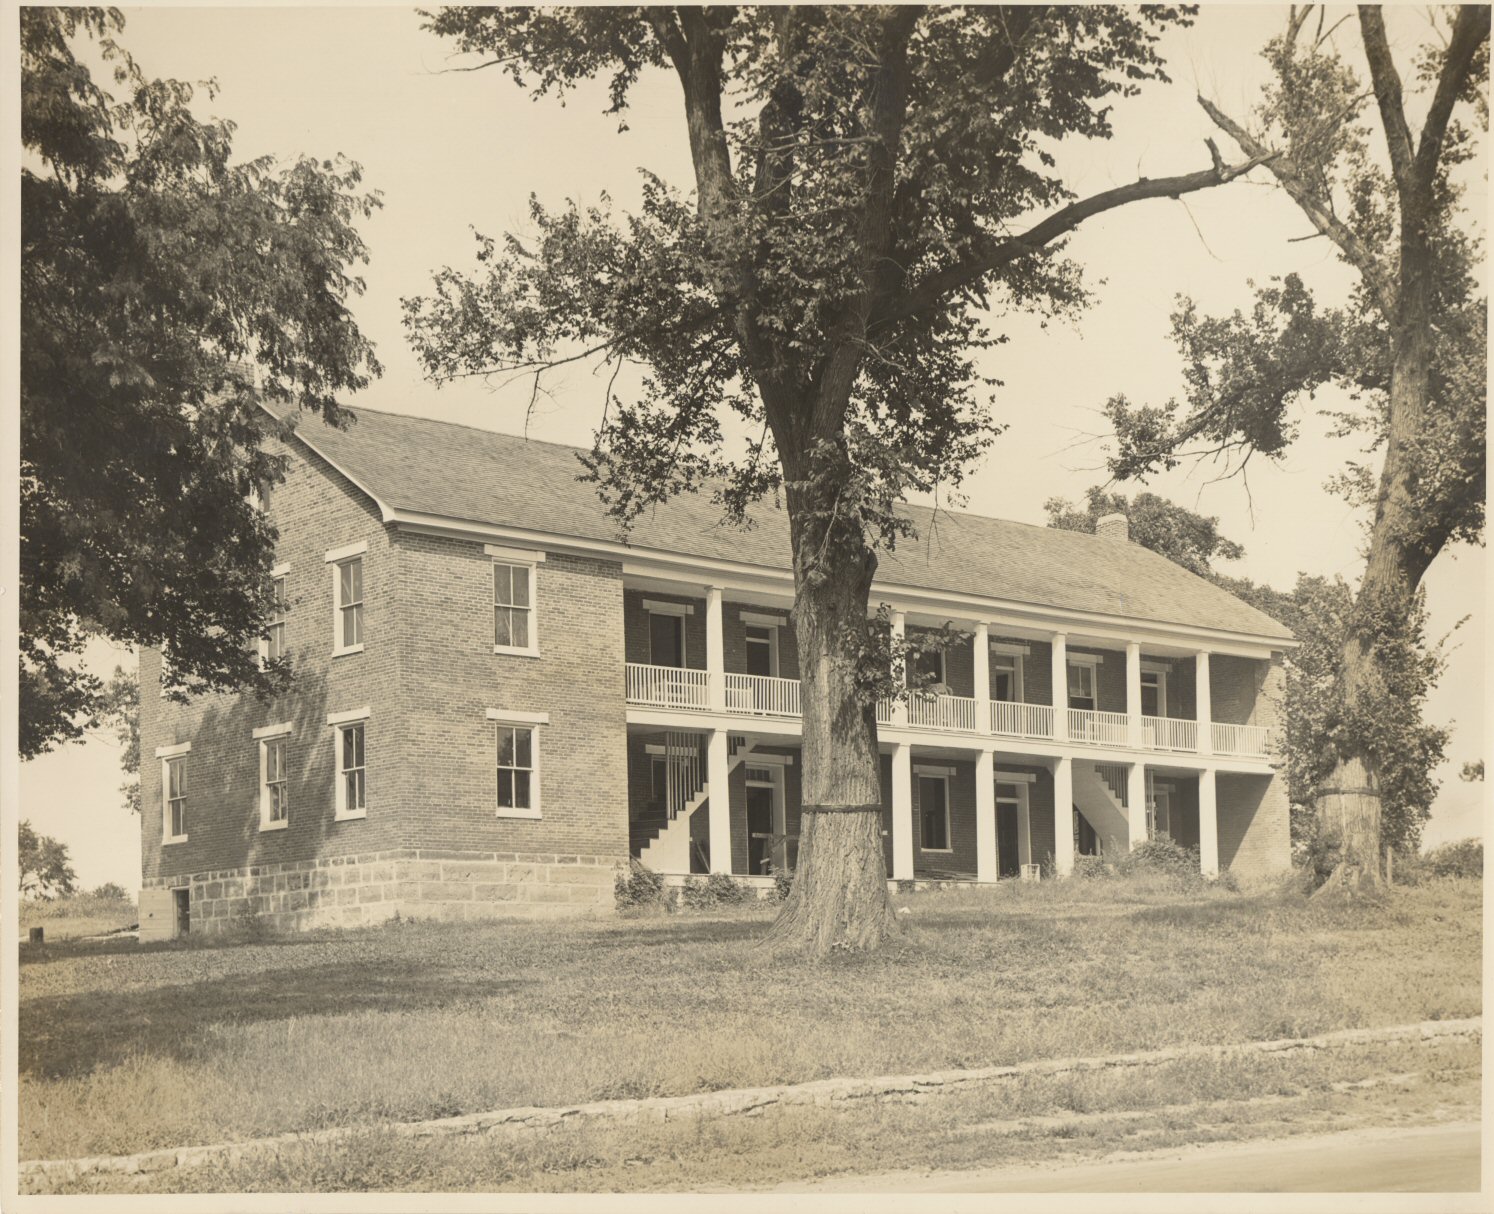 The North Building at the Shawnee Indian Mission site, c. 1940. Johnson County Museum